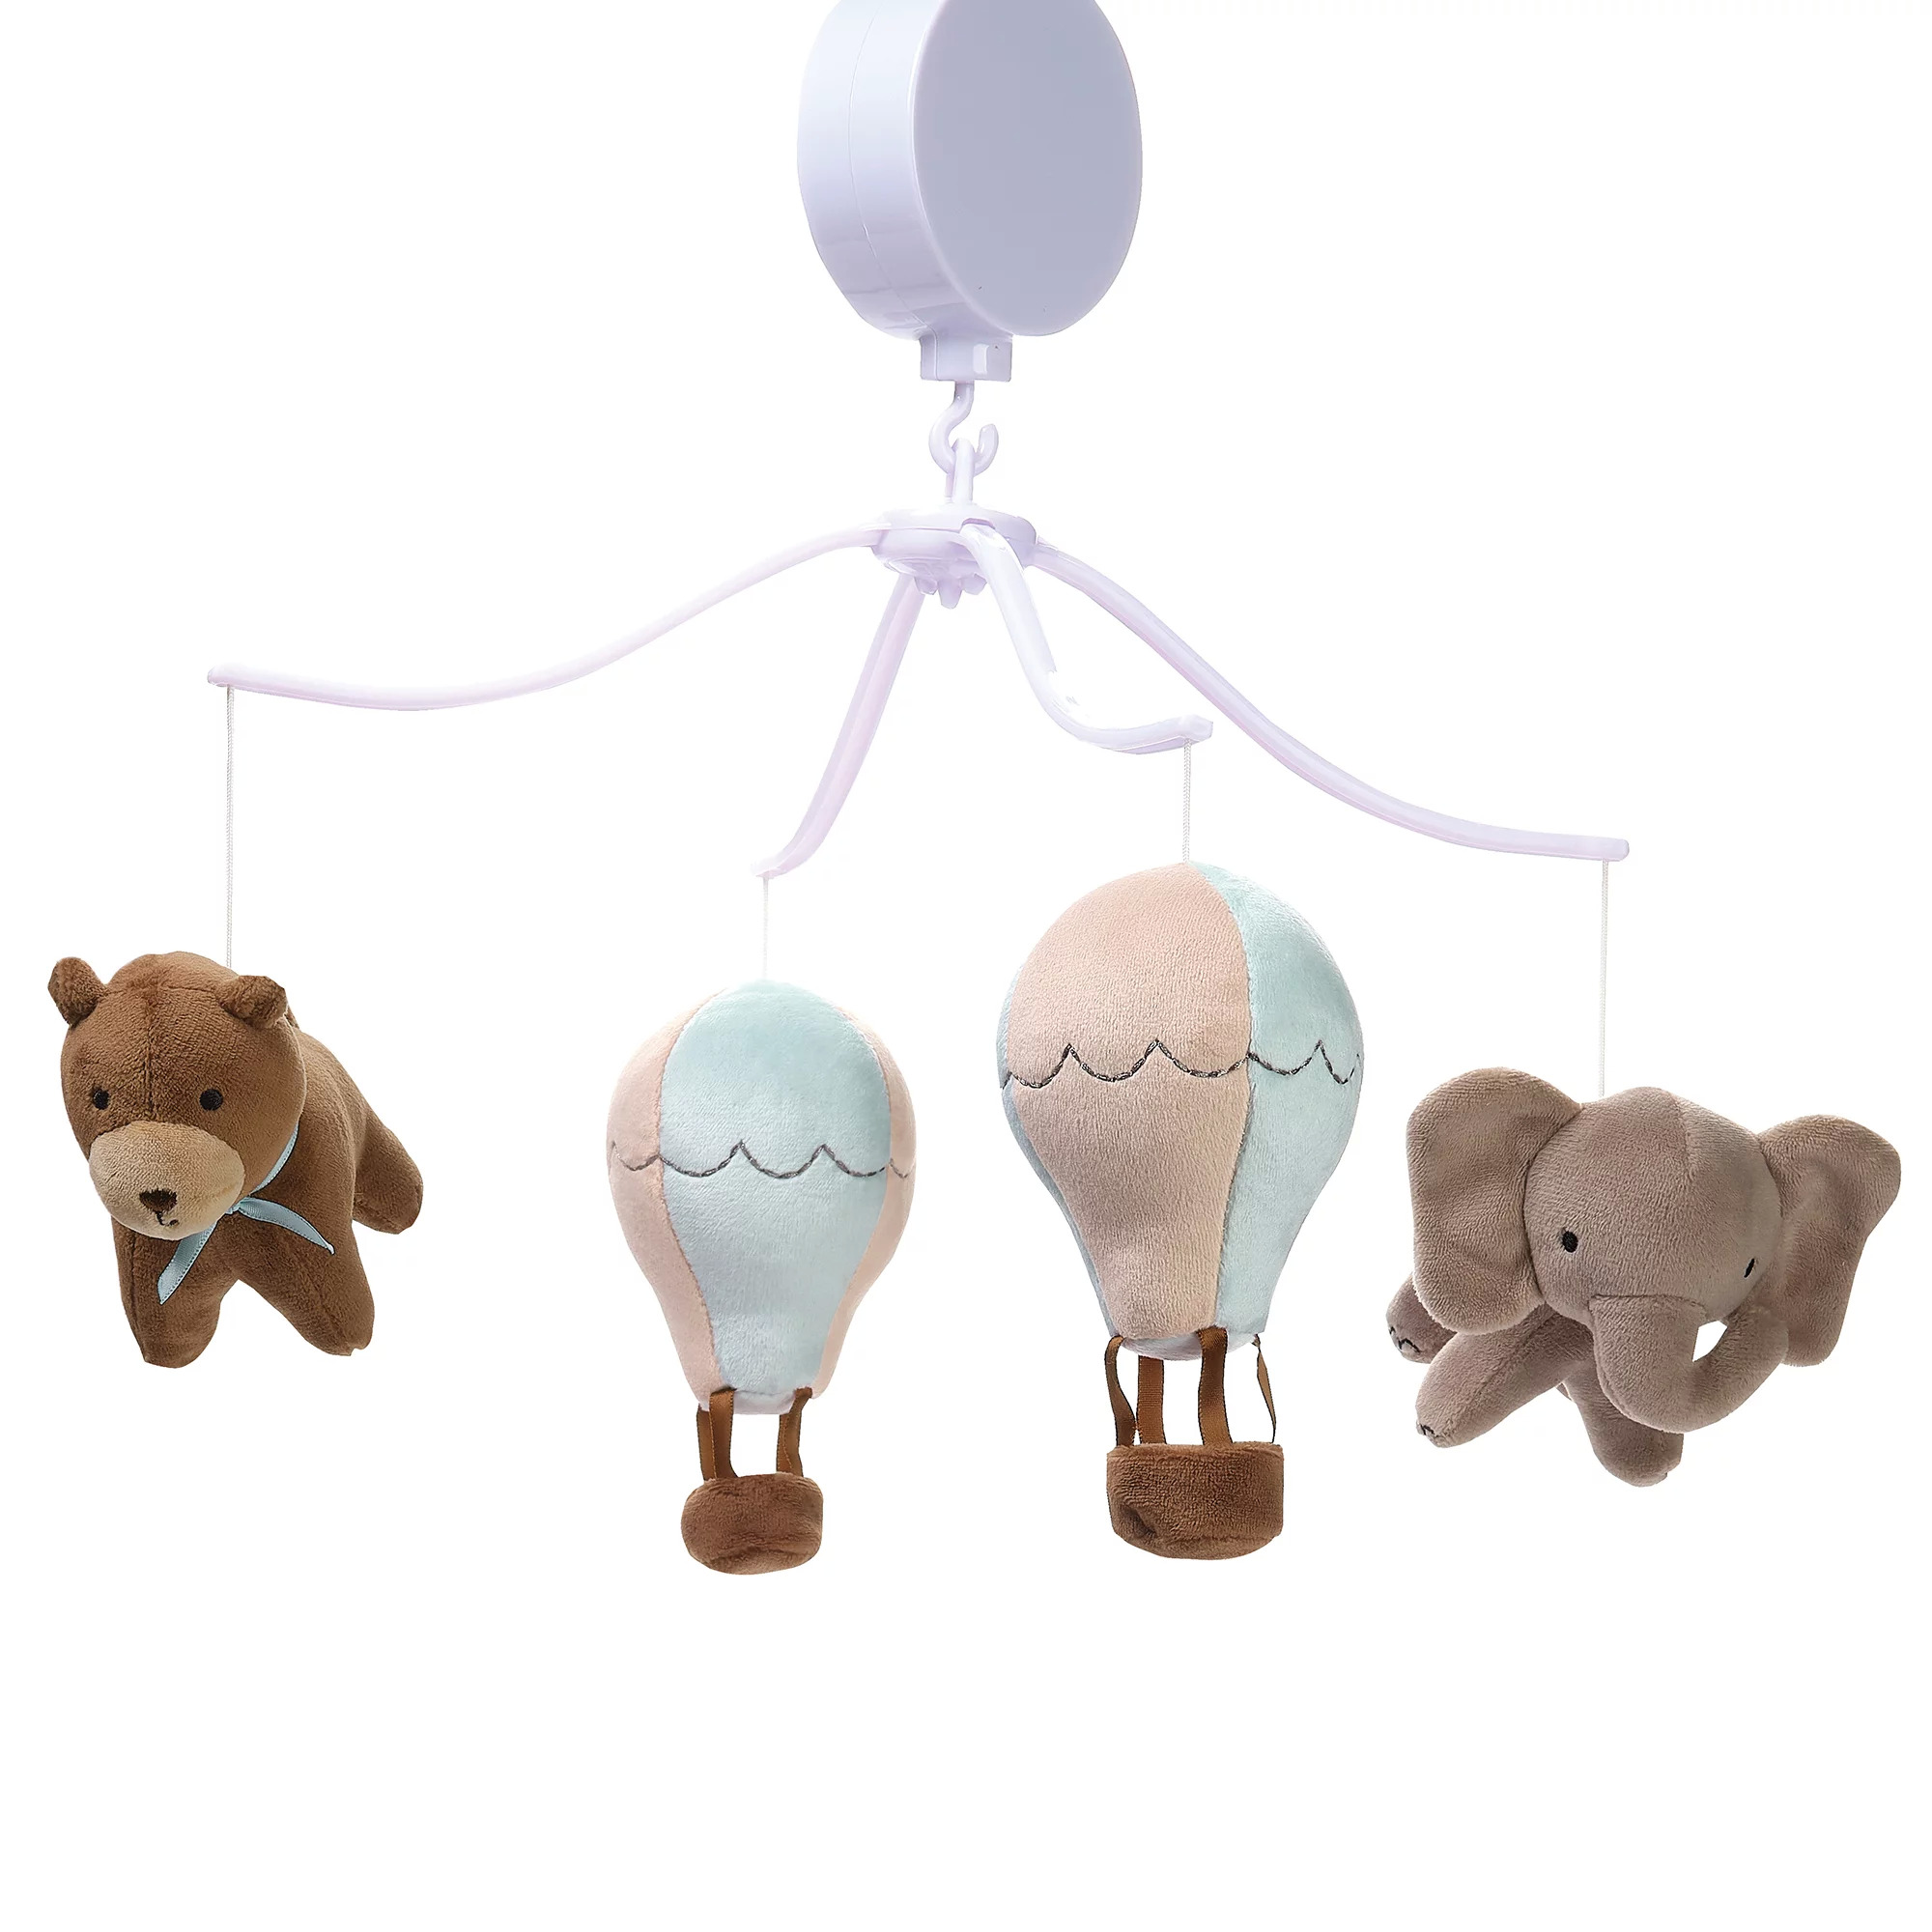 Bedtime Originals Up Up & Away Air Balloon Musical Baby Crib Mobile Soother $14.41  + Free S&H w/ Walmart+ or $35+